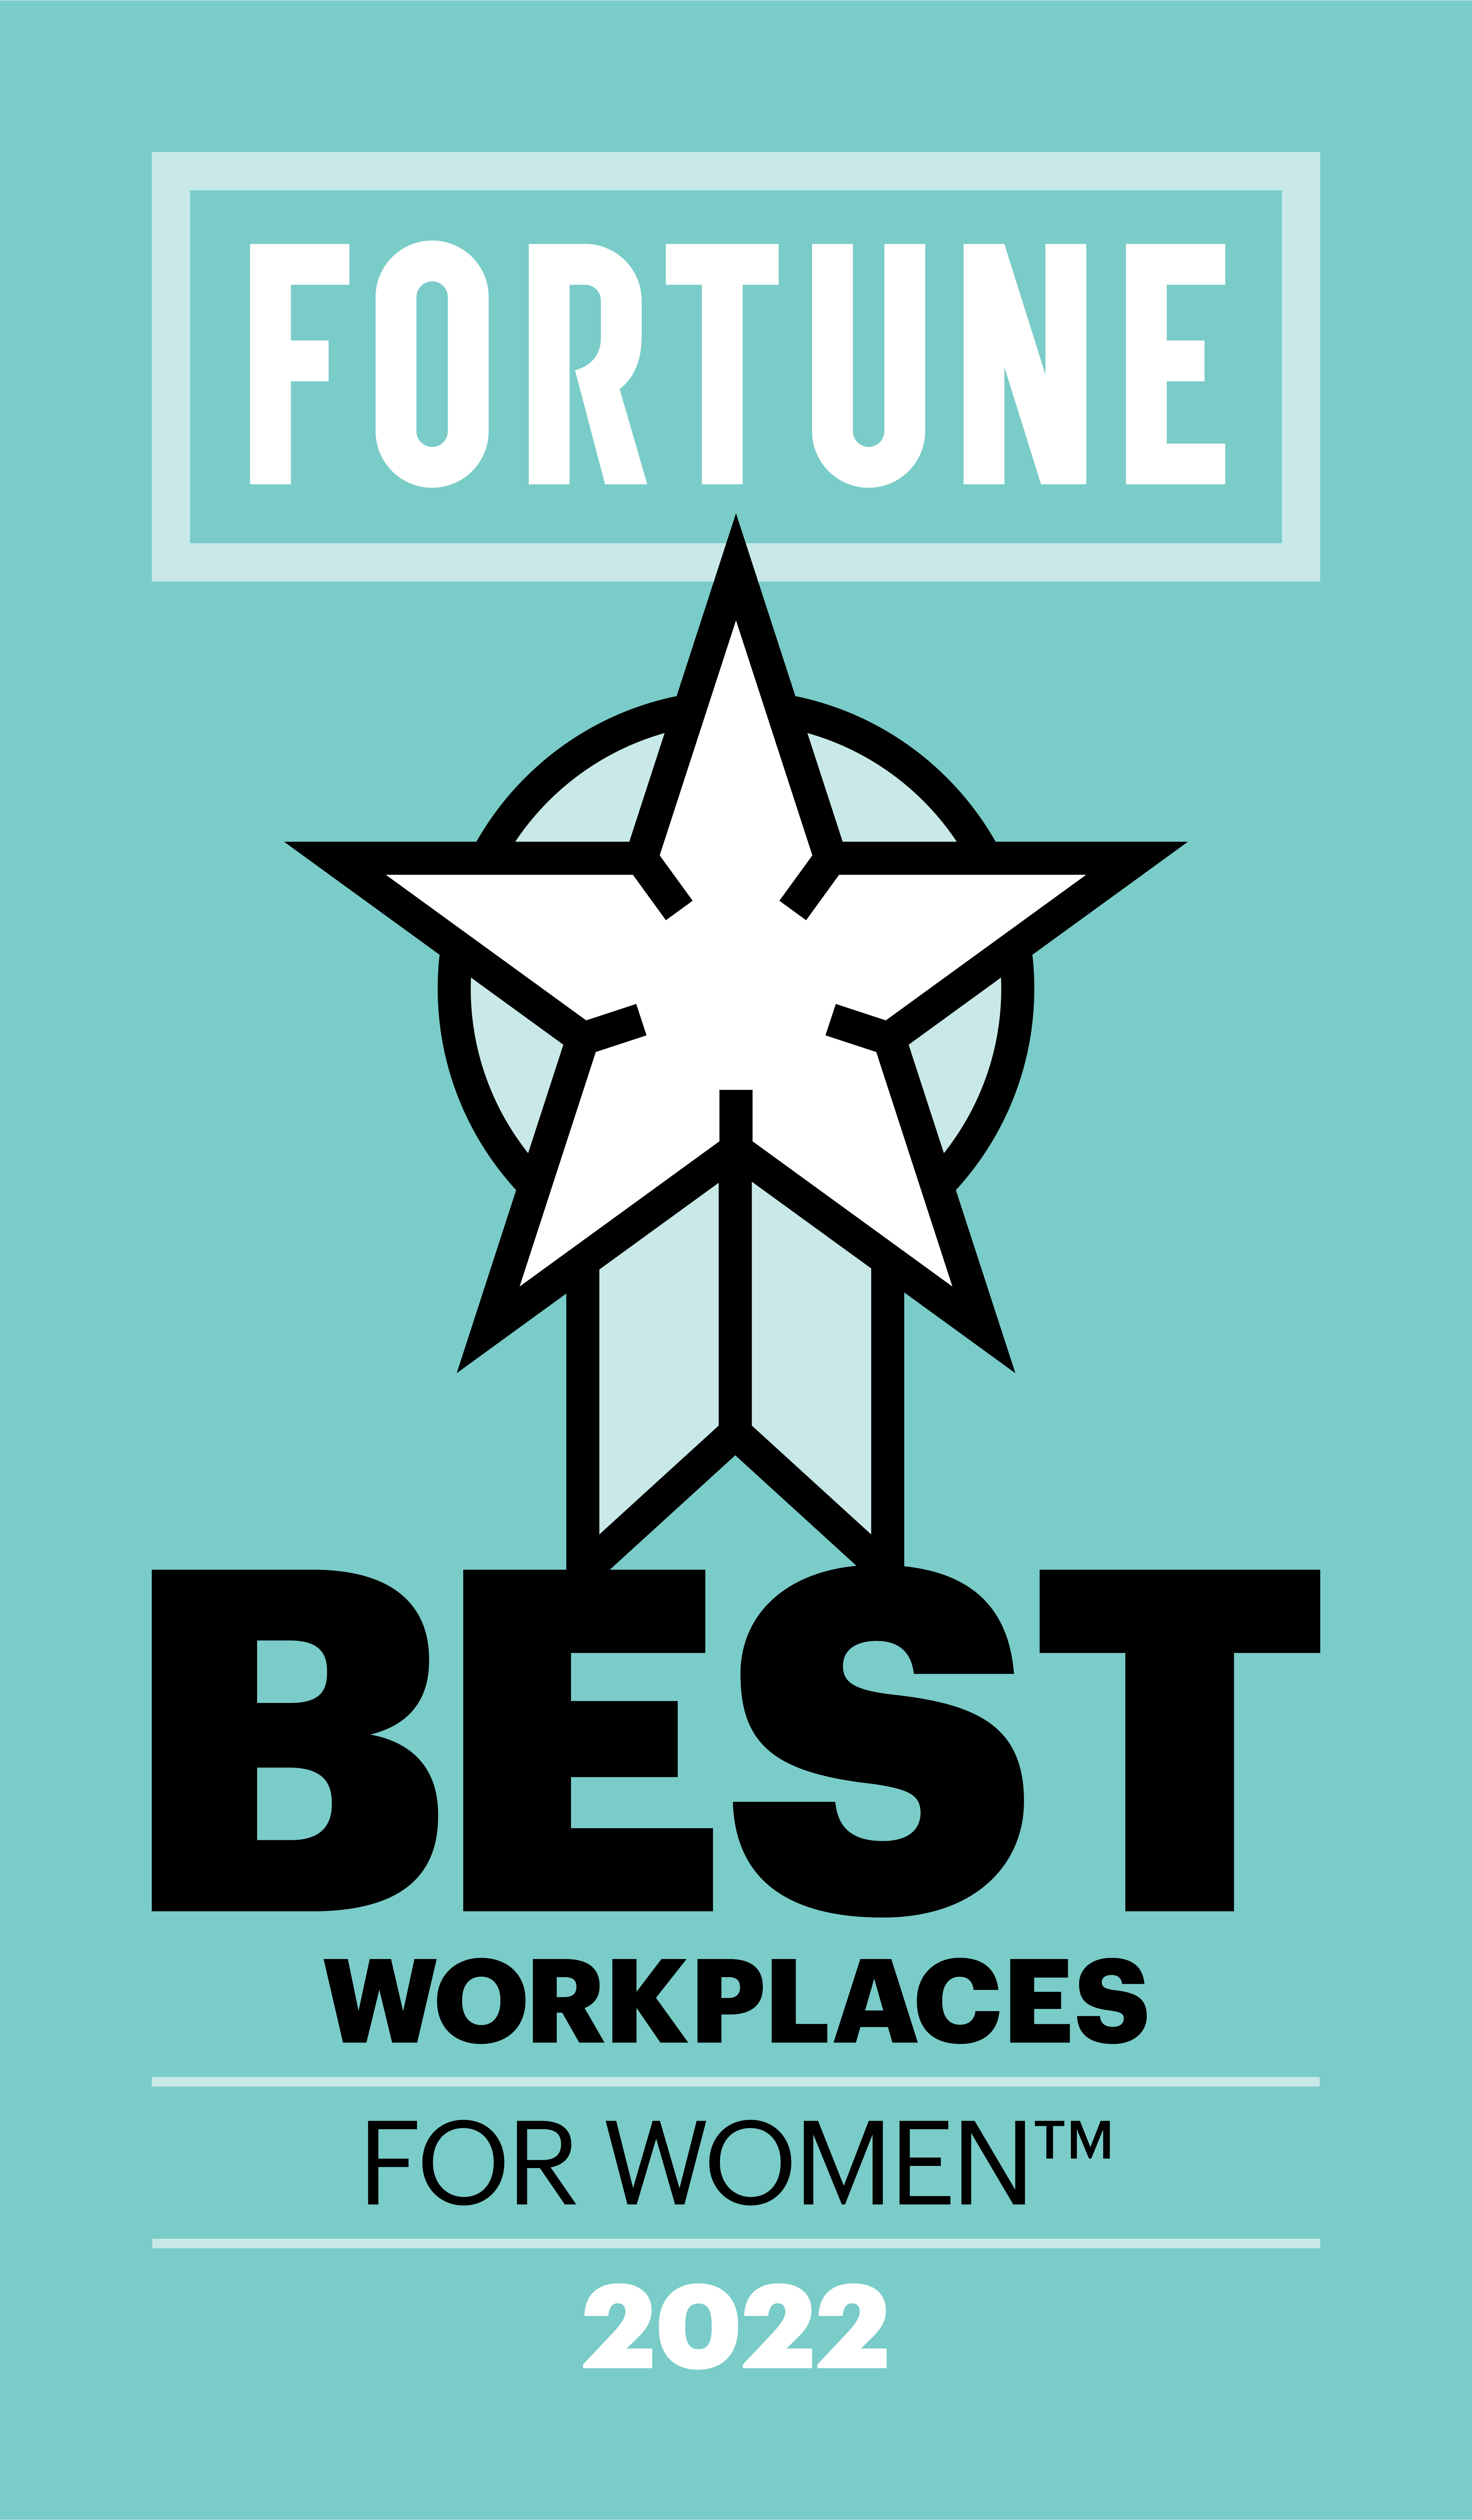 Fortune Best Workplaces for Women 2022